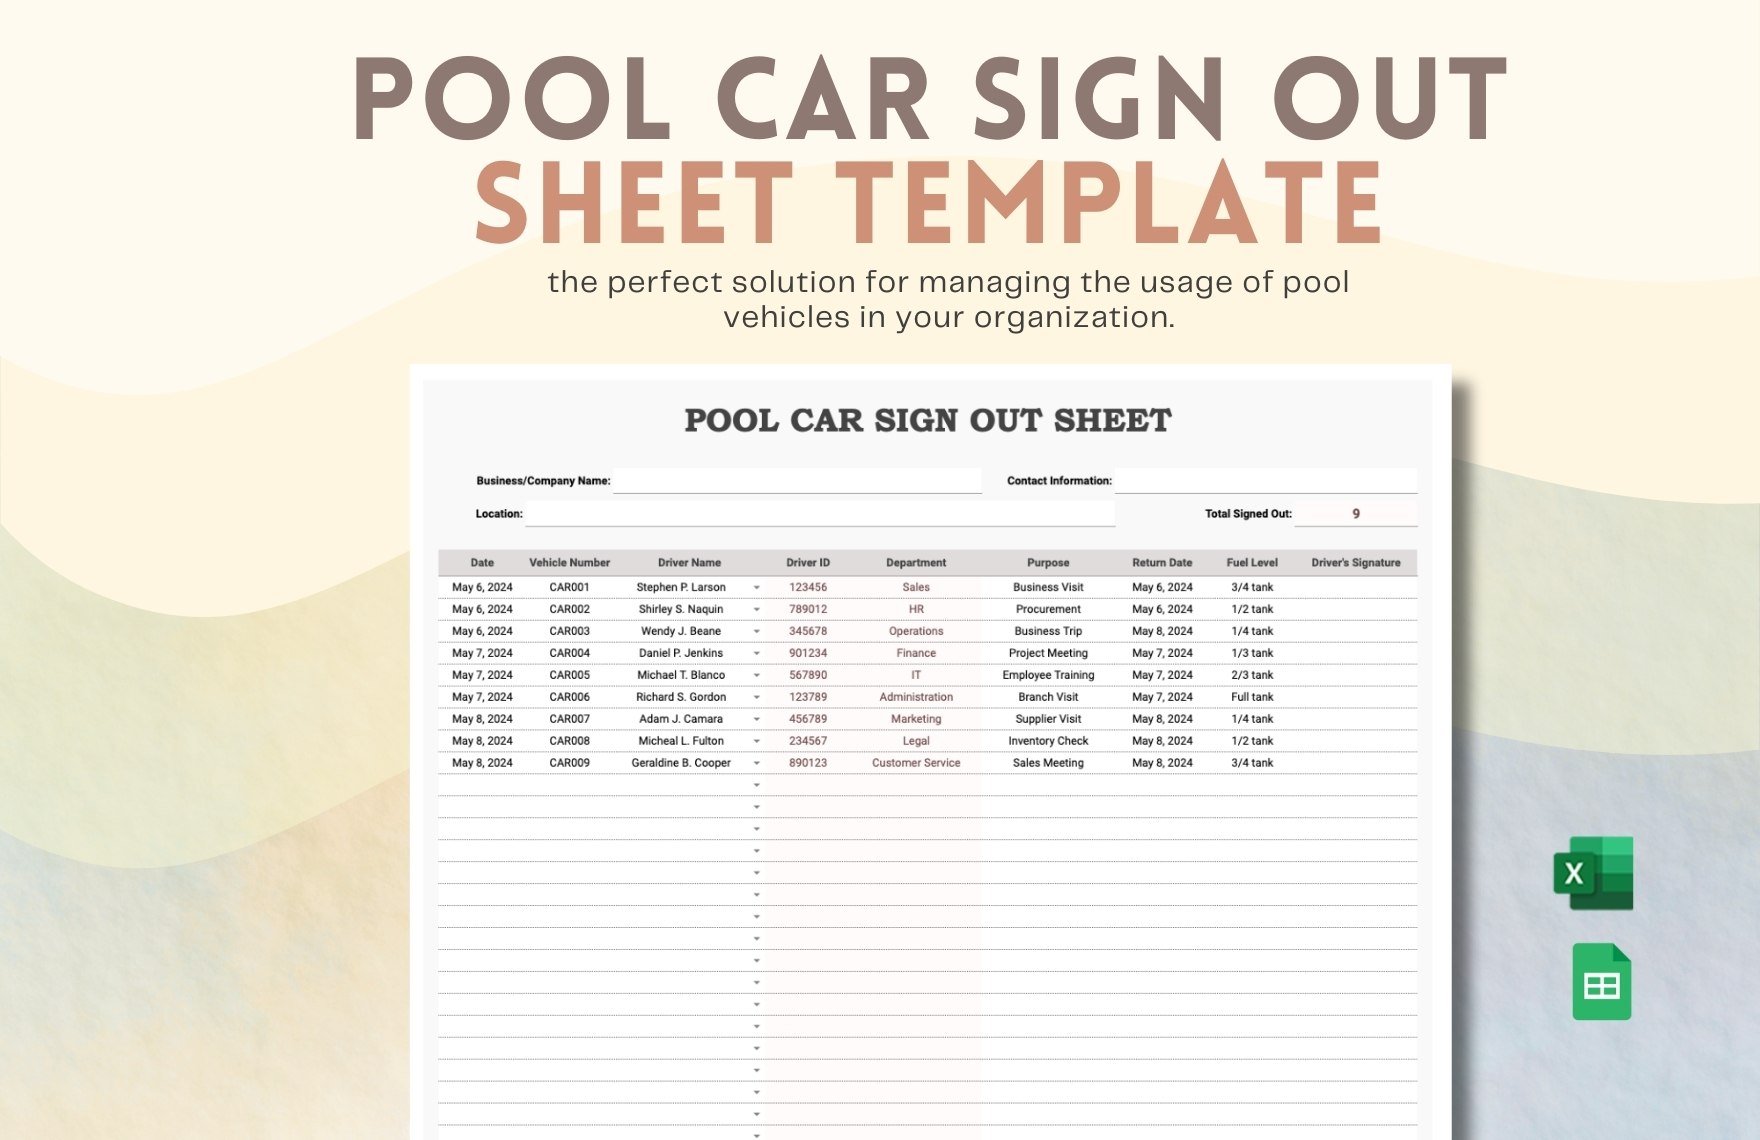 Pool Car Sign Out Sheet Template in Excel, Google Sheets